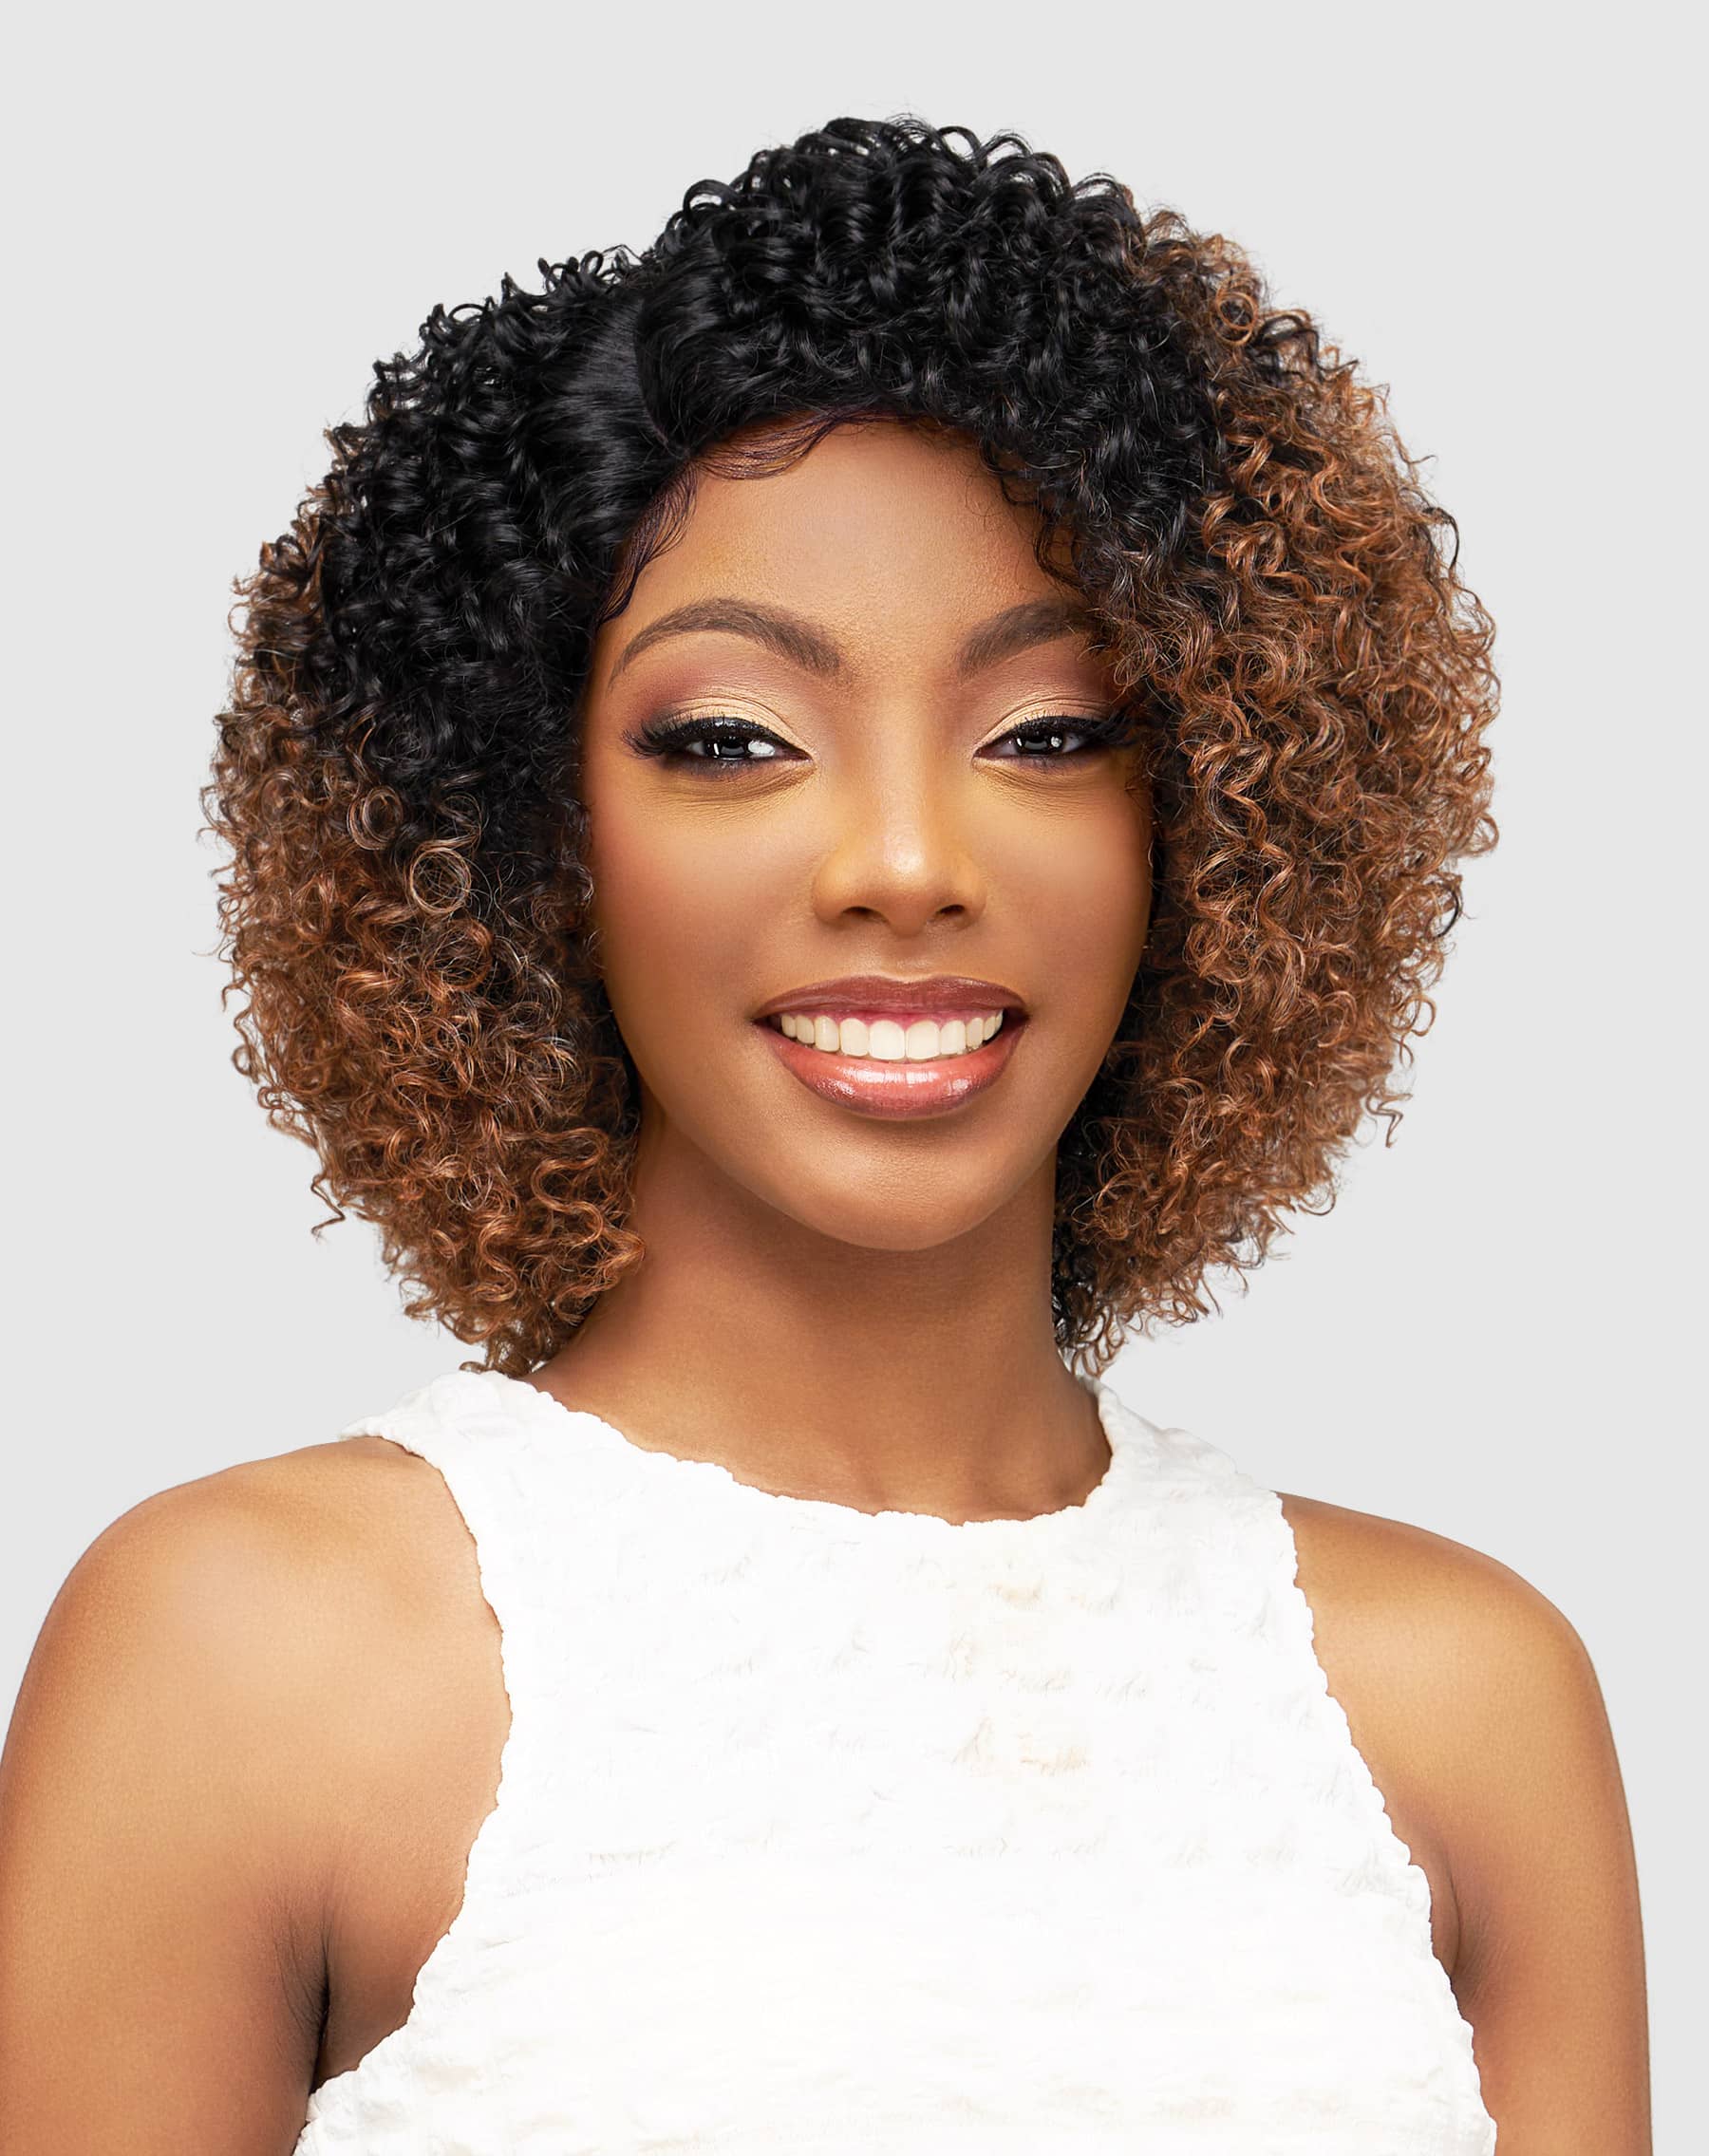 Vanessa Party Lace Synthetic Deep J-Curved HD Lace Part Wig DJ SOMI